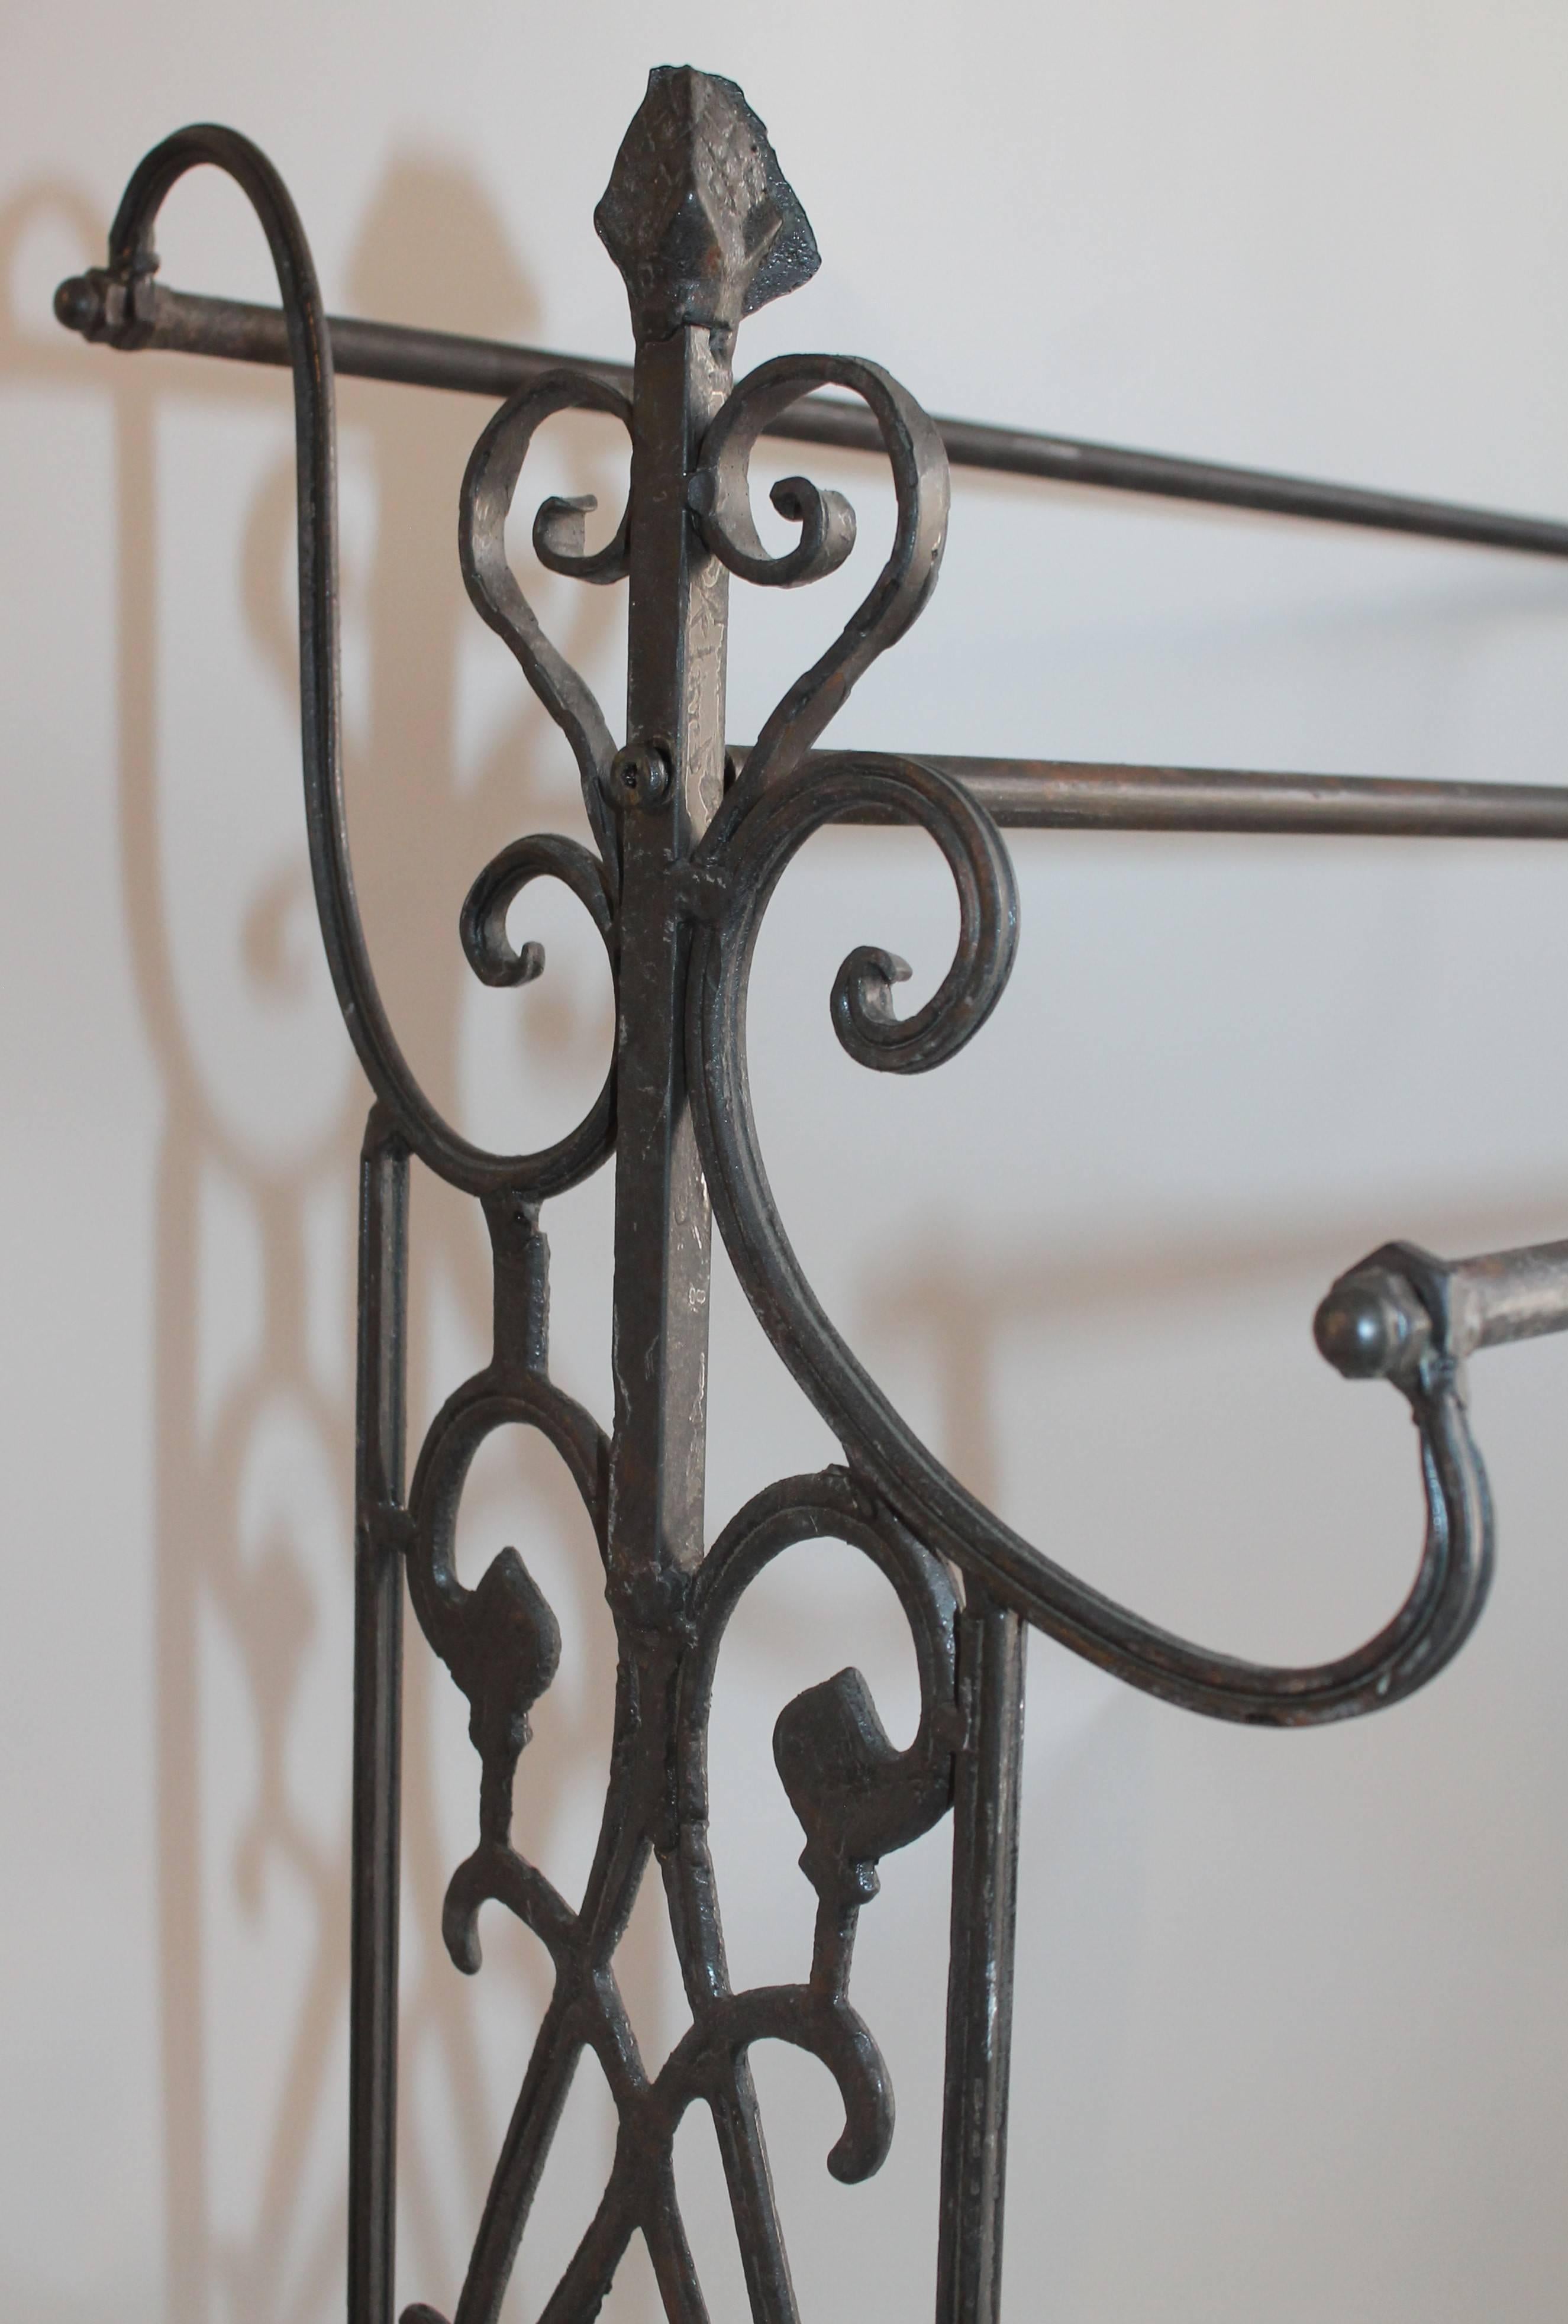 19th century iron quilt or blanket rack in nice condition. This sturdy and ornate rack works with any decor.